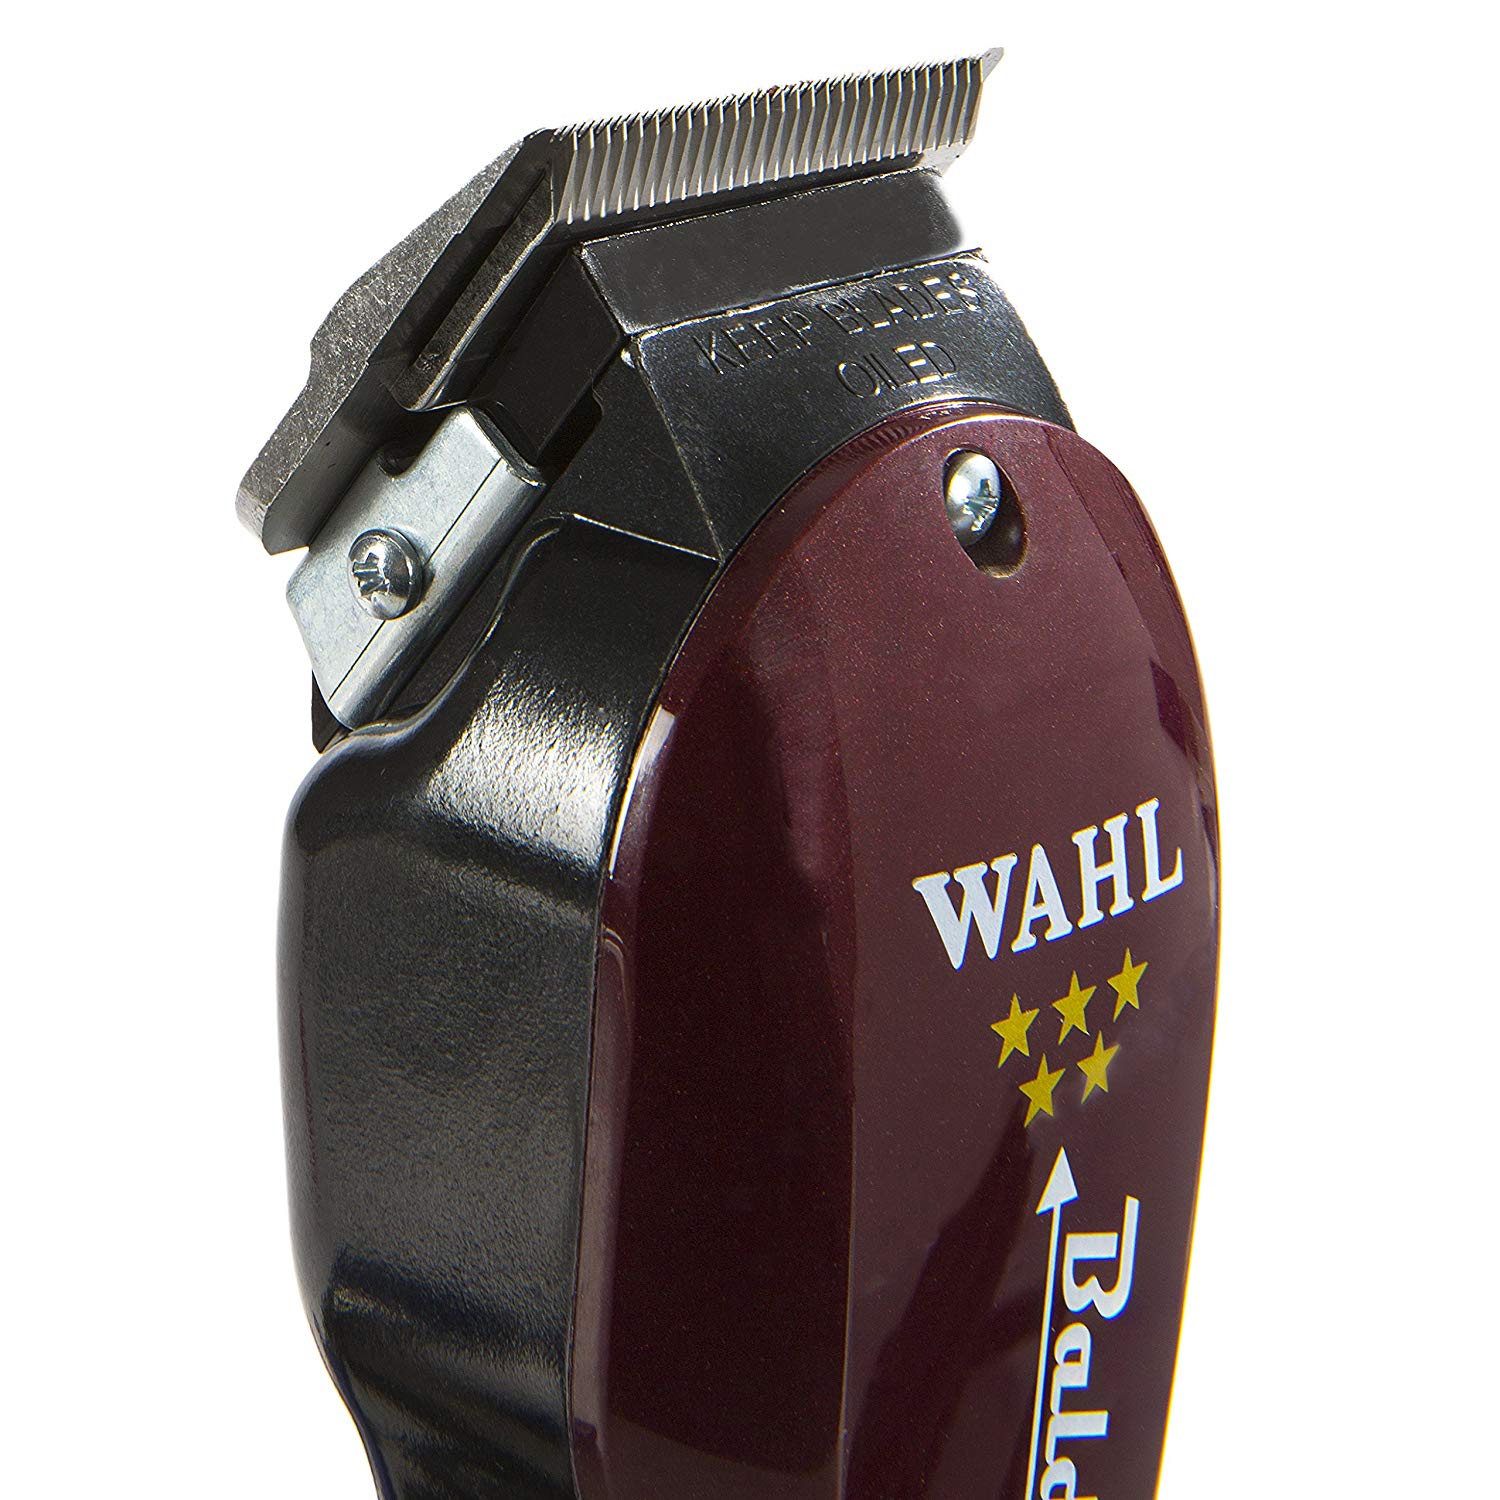 best afro hair clippers